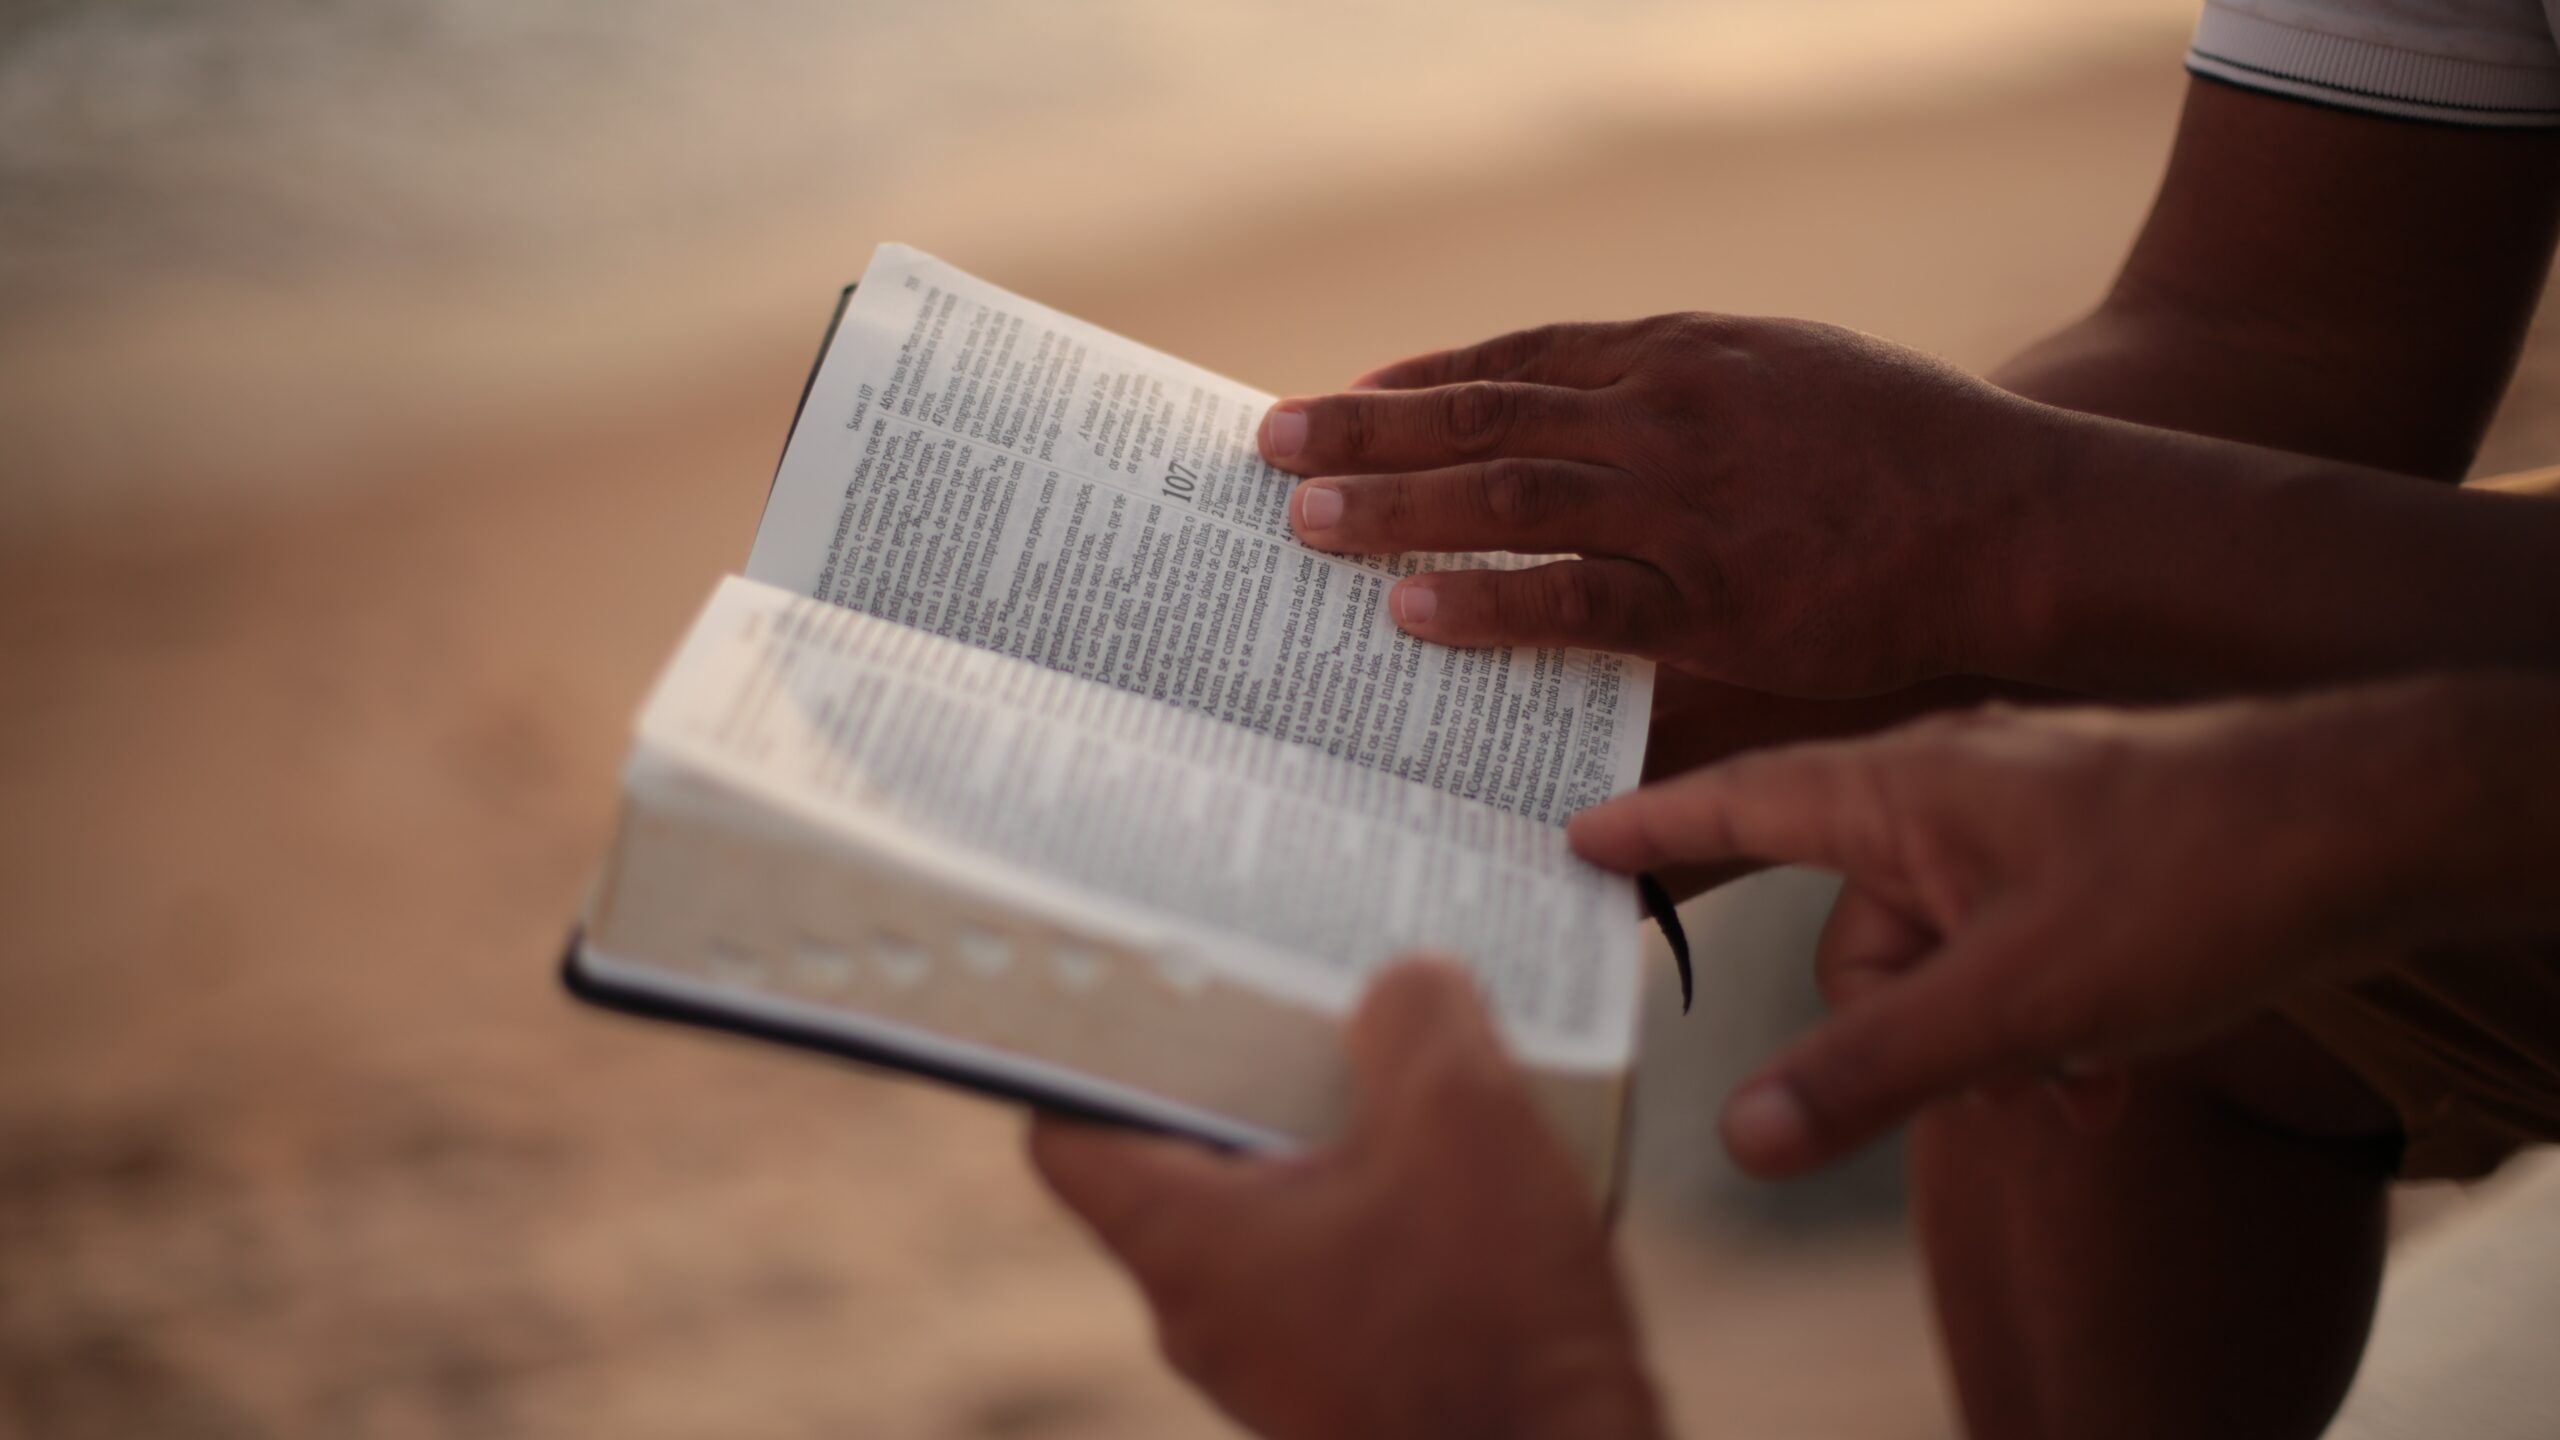 Photo of an open Bible held by two people's hands